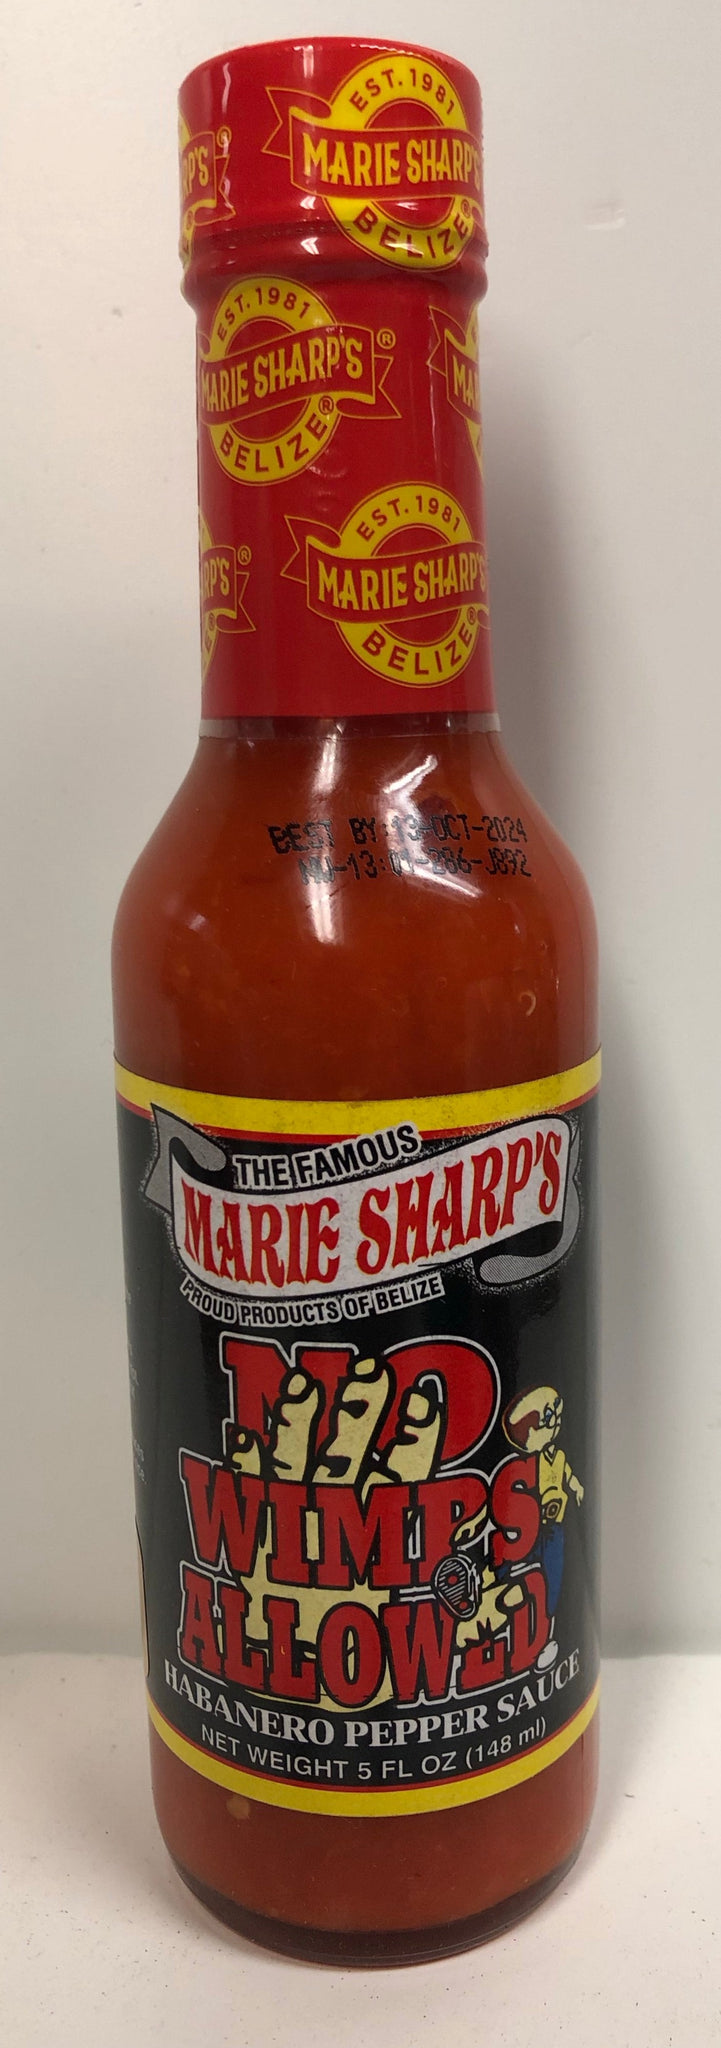 Marie Sharps No Wimps Allowed Habanero Pepper Sauce